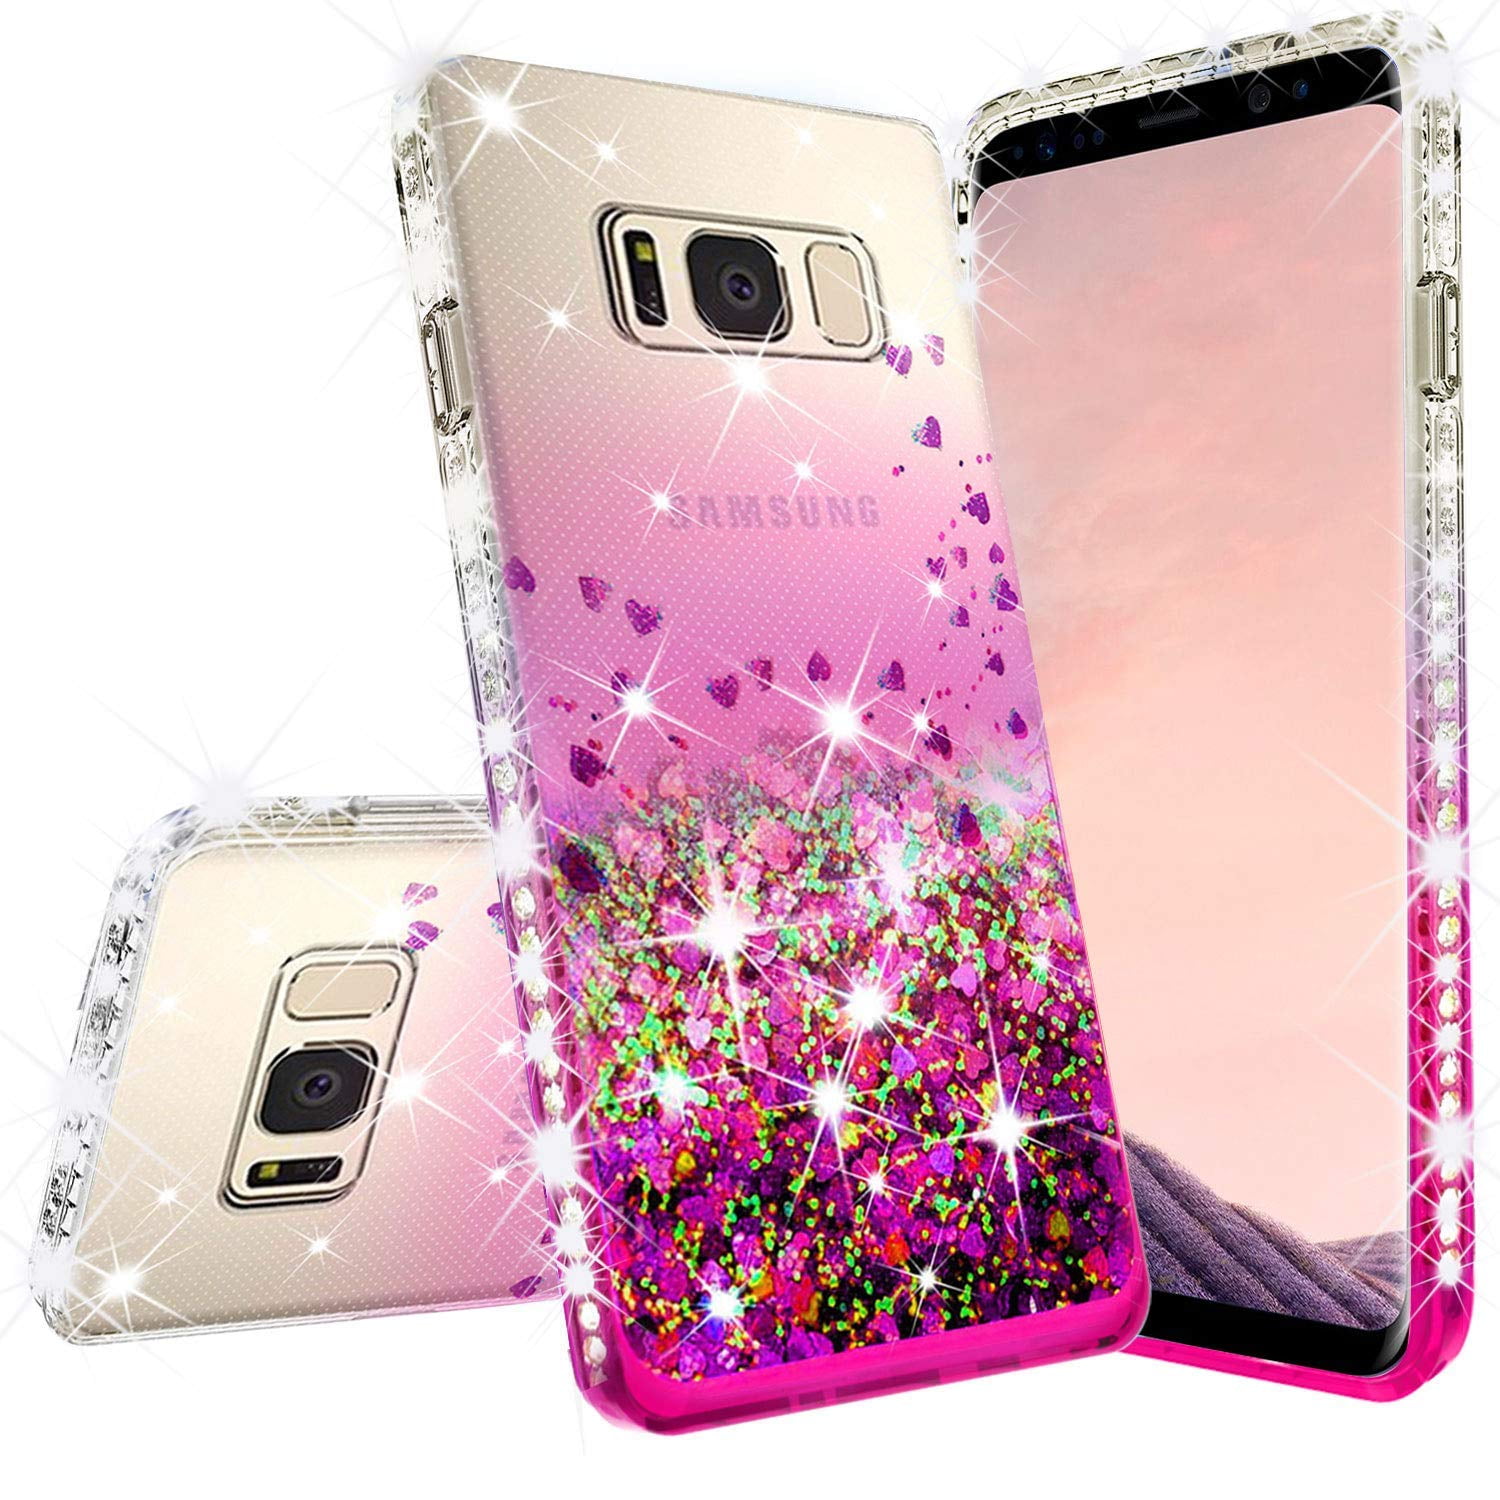 Personalised Boxing Glass Case Phone Cover for Samsung Galaxy S9